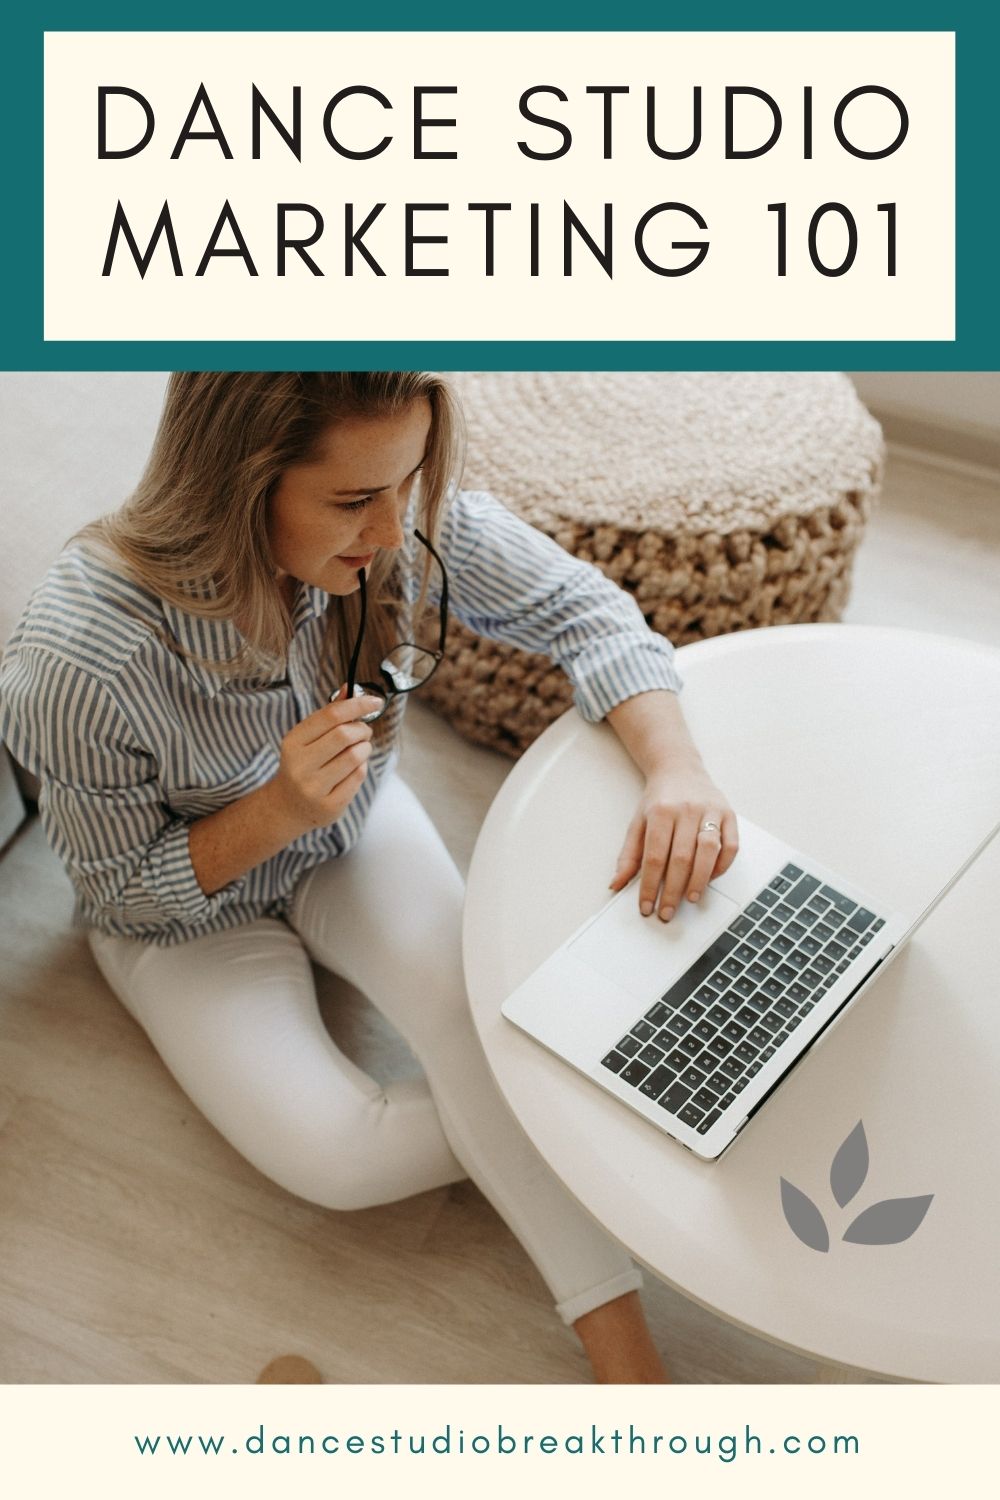 The complete guide to marketing your dance studio